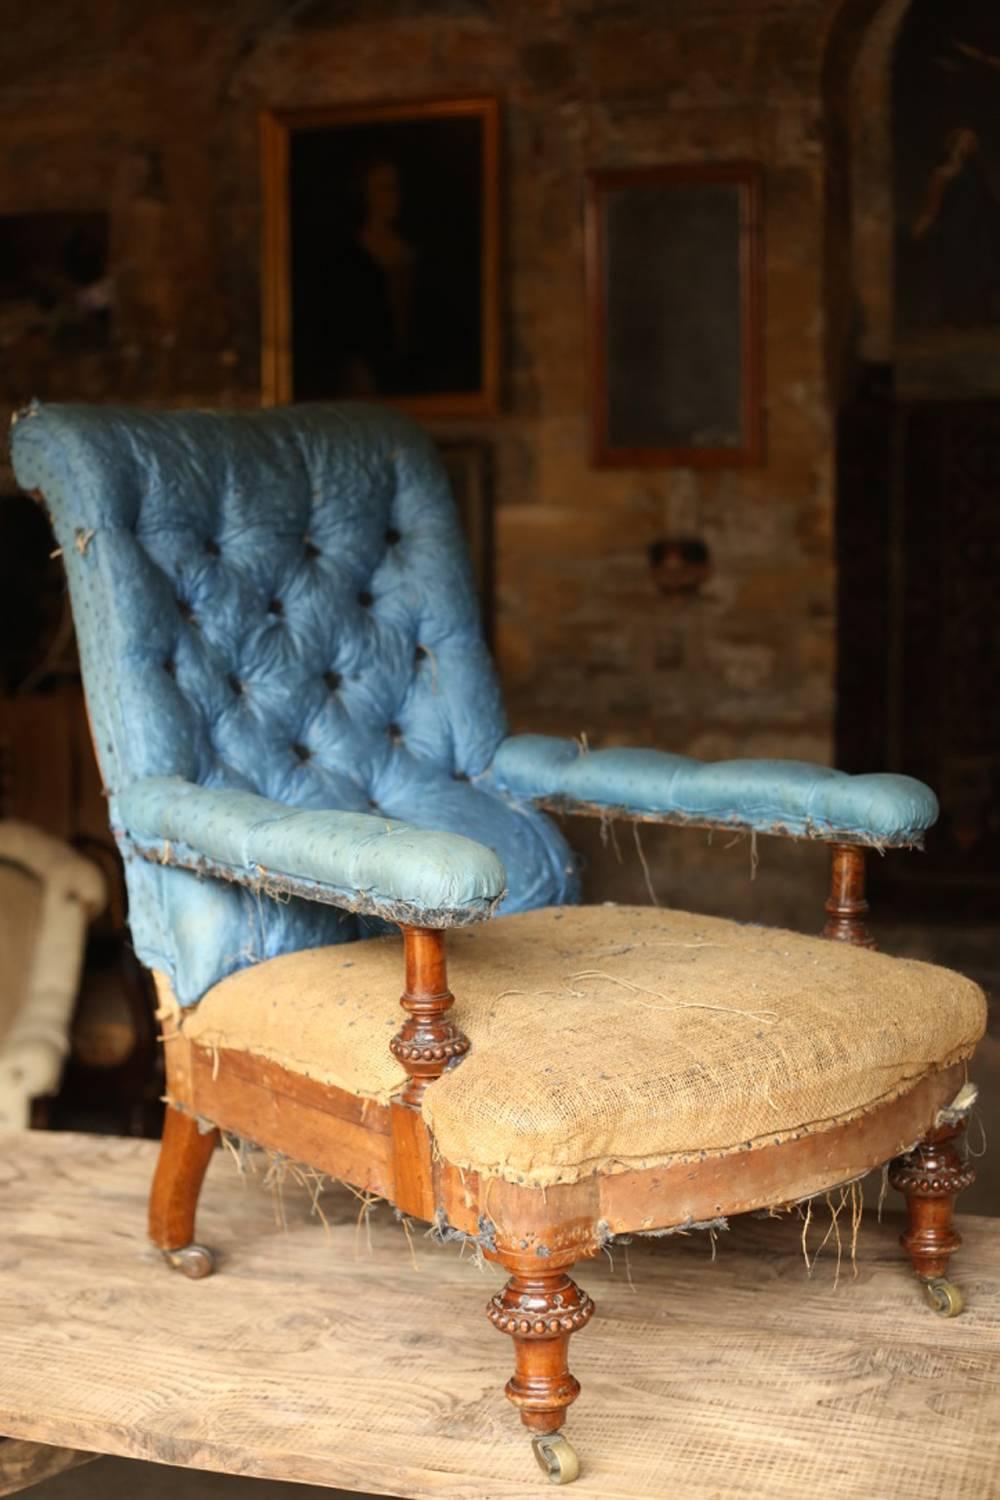 This is a very stylish last 19th century, low deep English country house armchair with a buttoned back. Retains part of its original blue silk upholstery that is very vivid even after all these years. High quality caved front legs with original